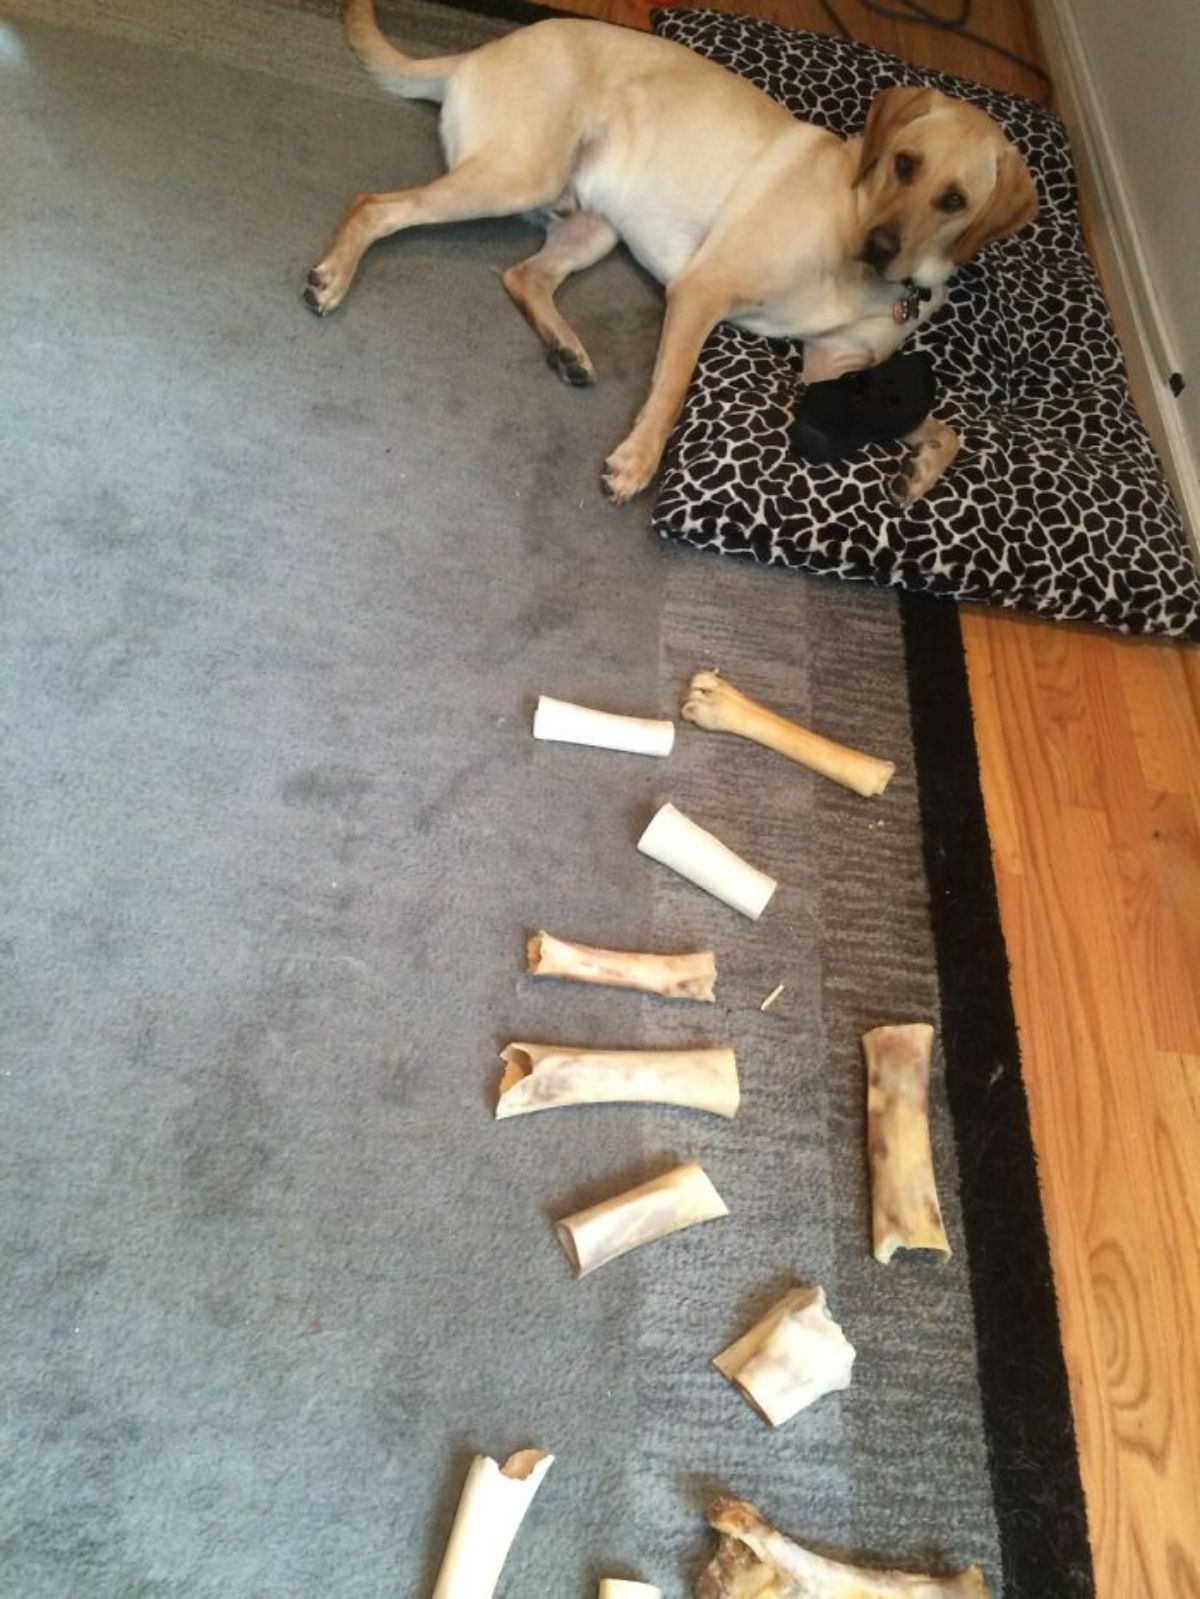 yellow labrador retriever laying half on a dog bed and half on the floor with a chewed shoe with lots of bones placed on the floor in front of the dog